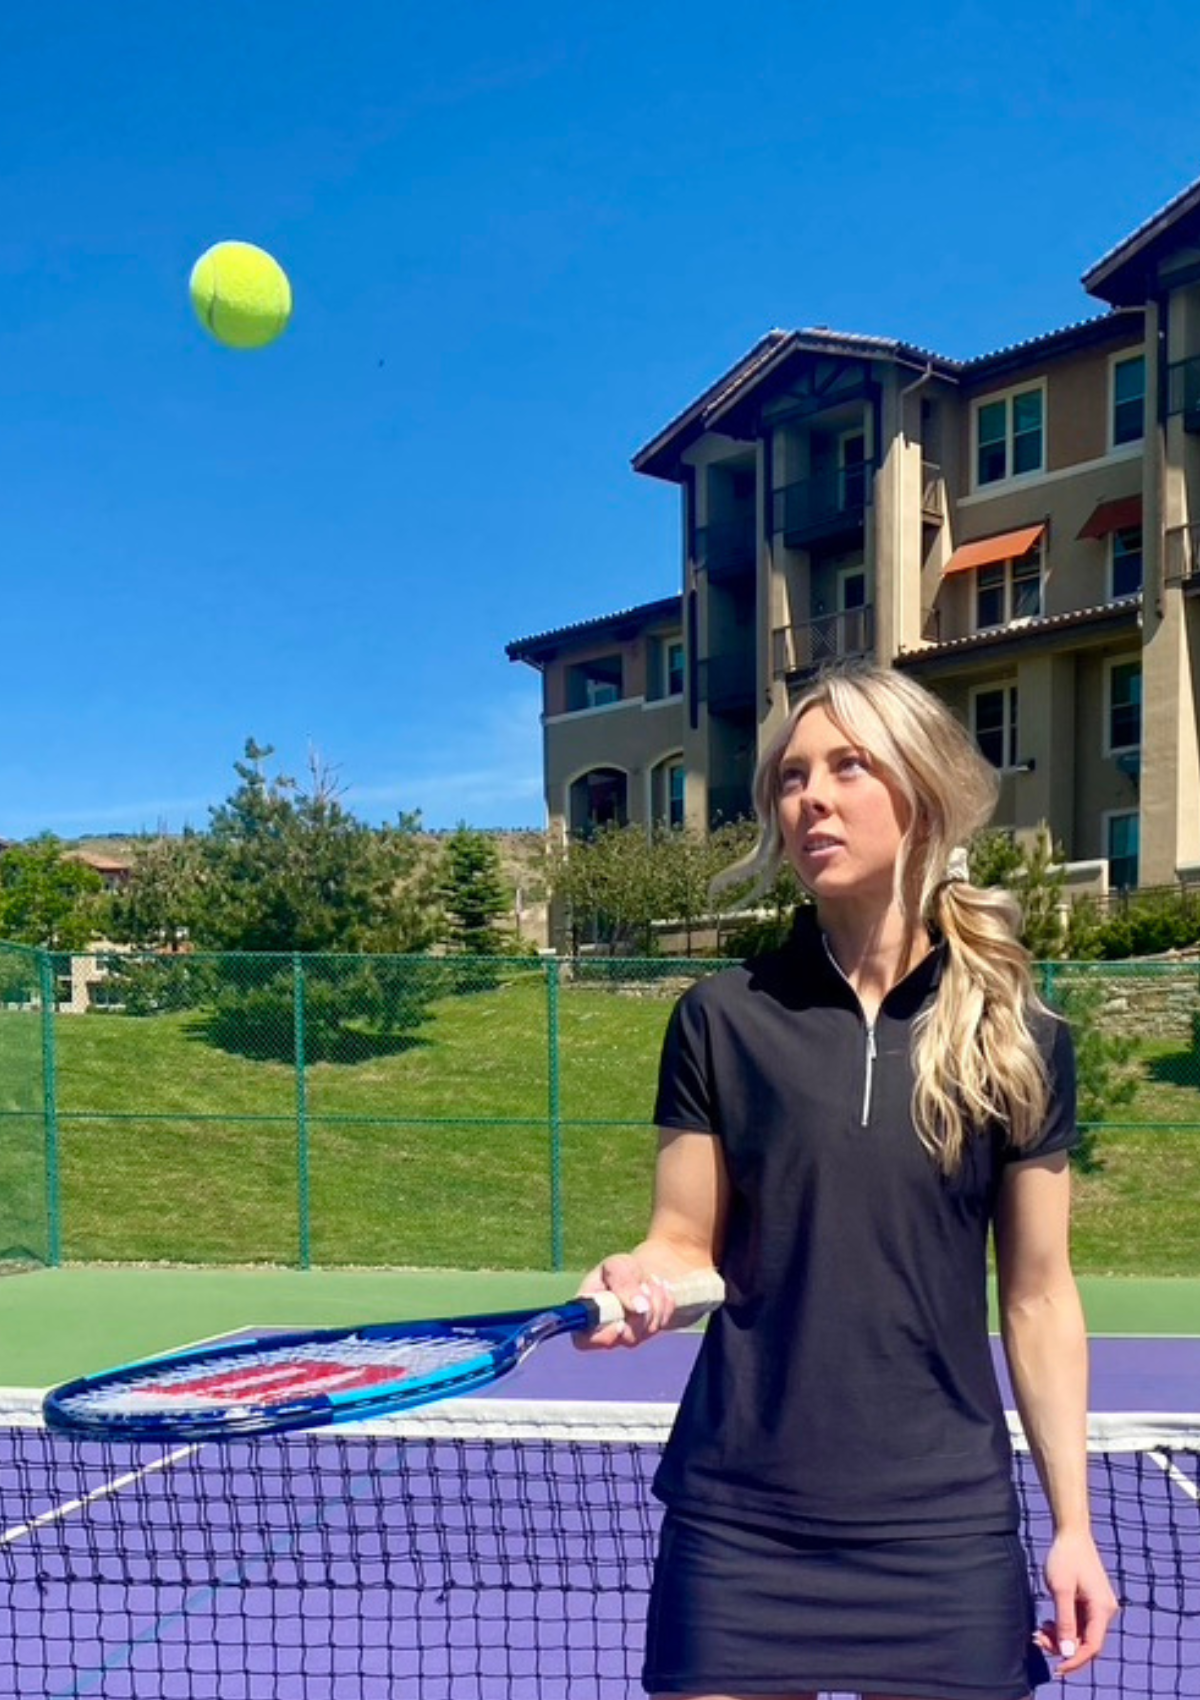 Woman bouncing tennis ball on court in front of mountainside home